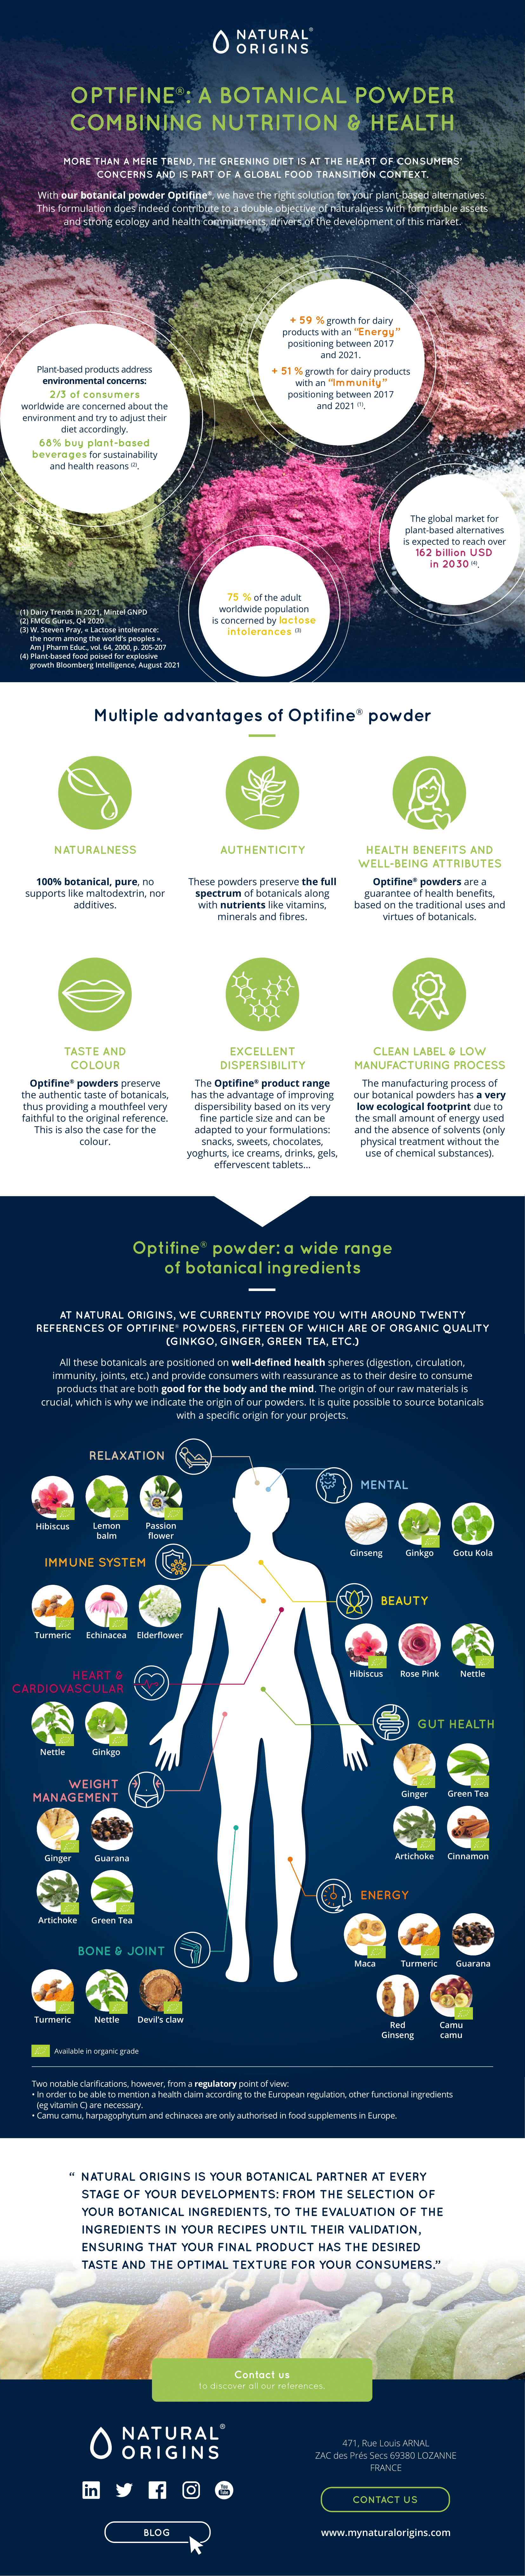 [INFOGRAPHIC] Optifine®: a botanical powder combining nutrition & health